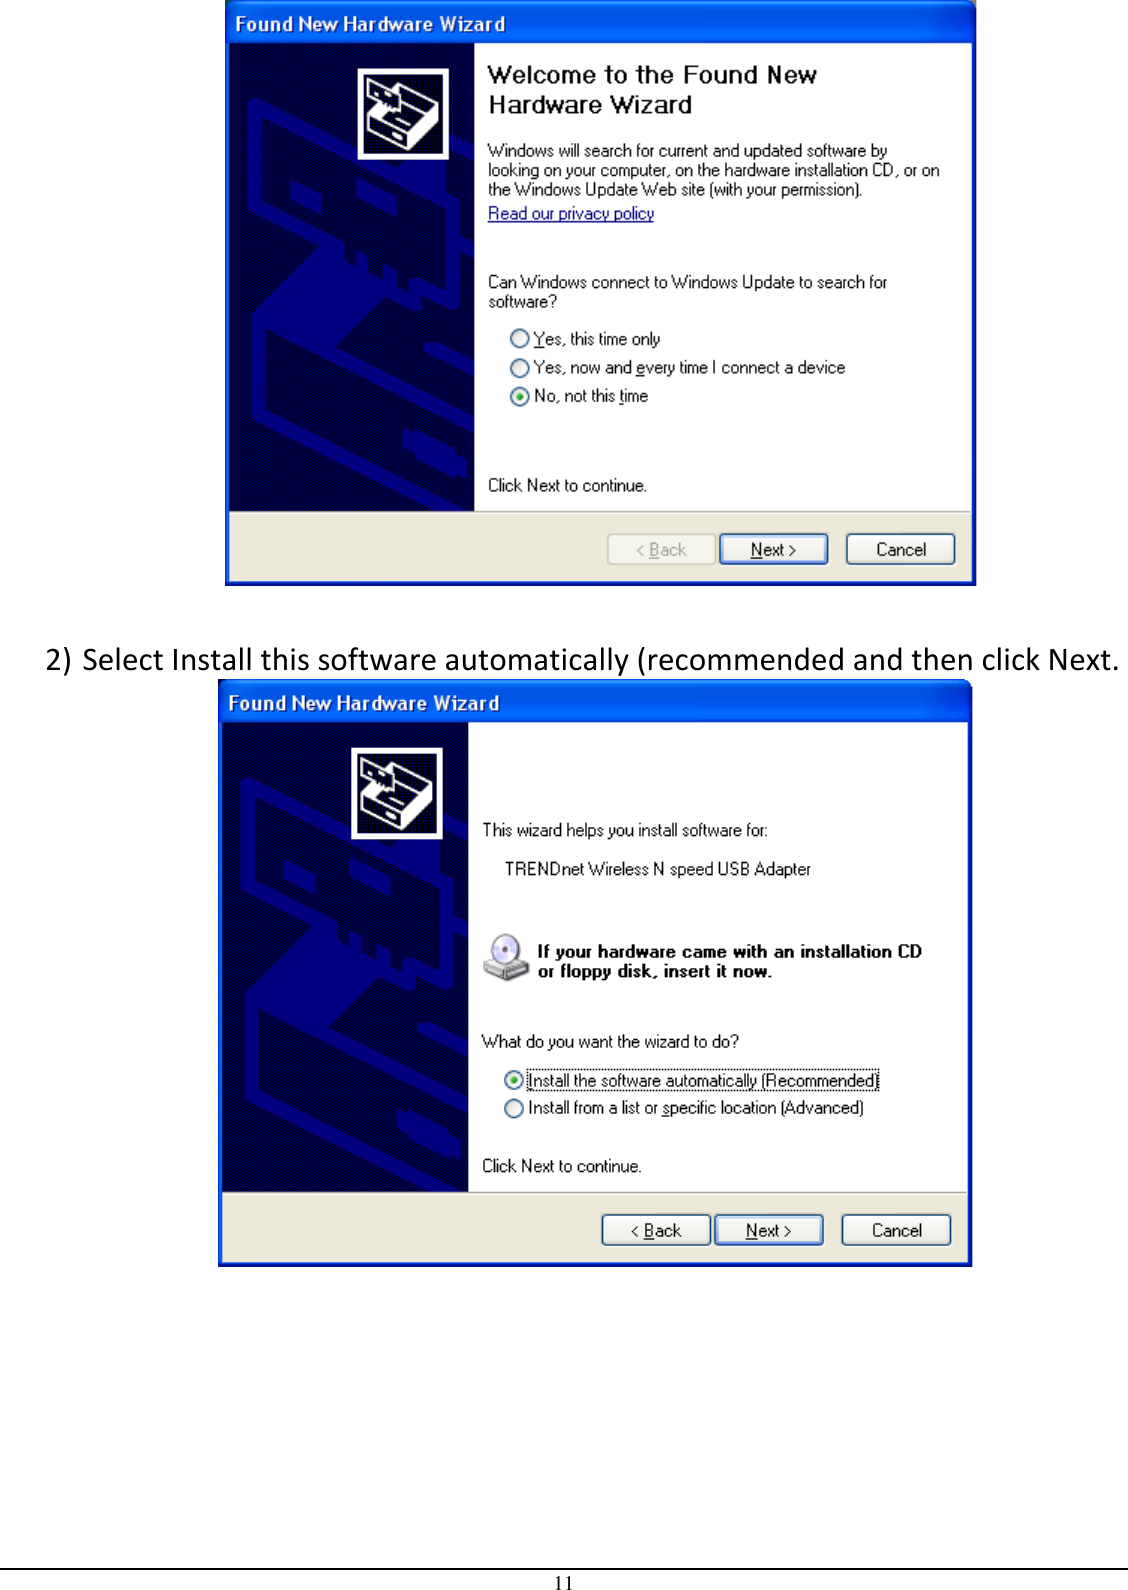 11   2) Select Install this software automatically (recommended and then click Next.  